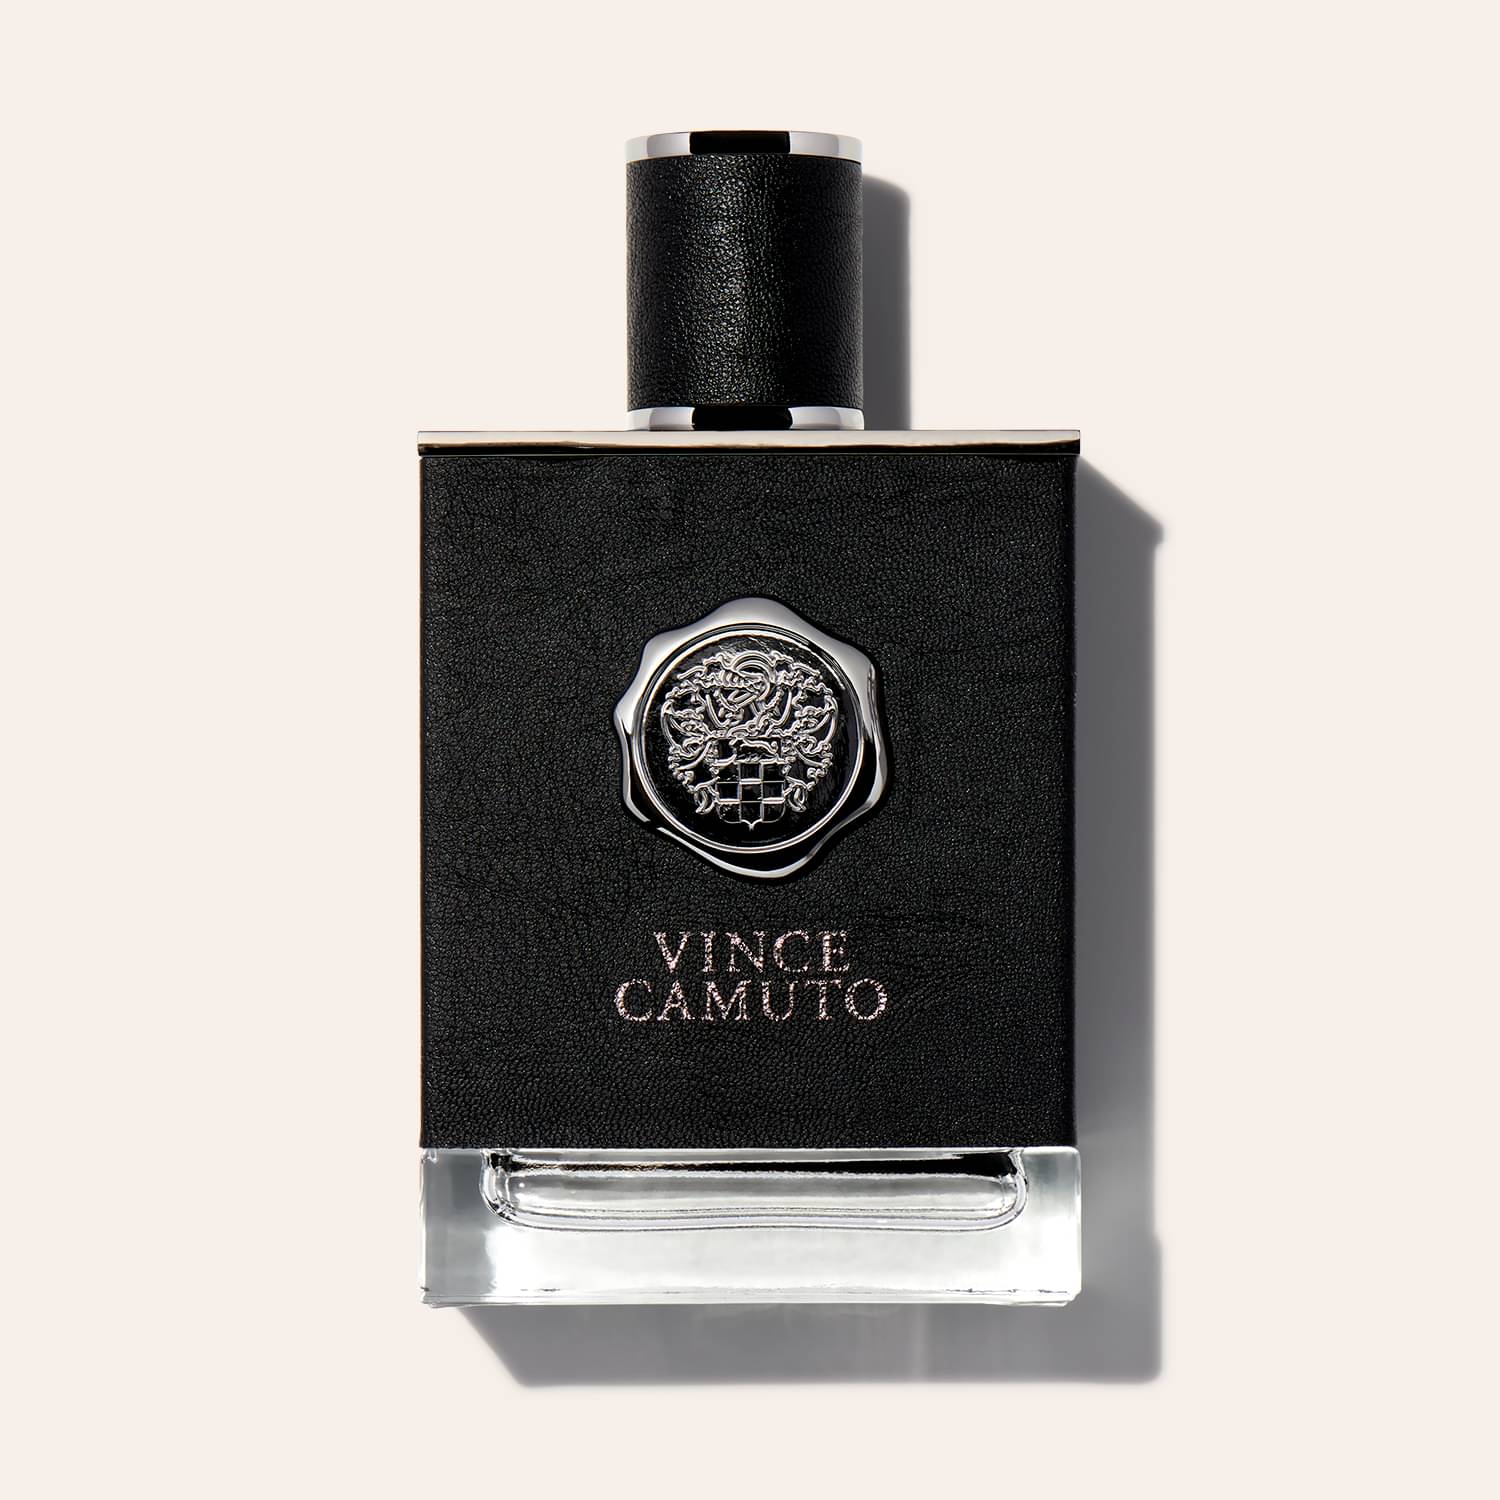 SCENTBOX LOVE IT OR LEAVE IT (VINCE CAMUTO VIRTU BY: Vince Camuto) 